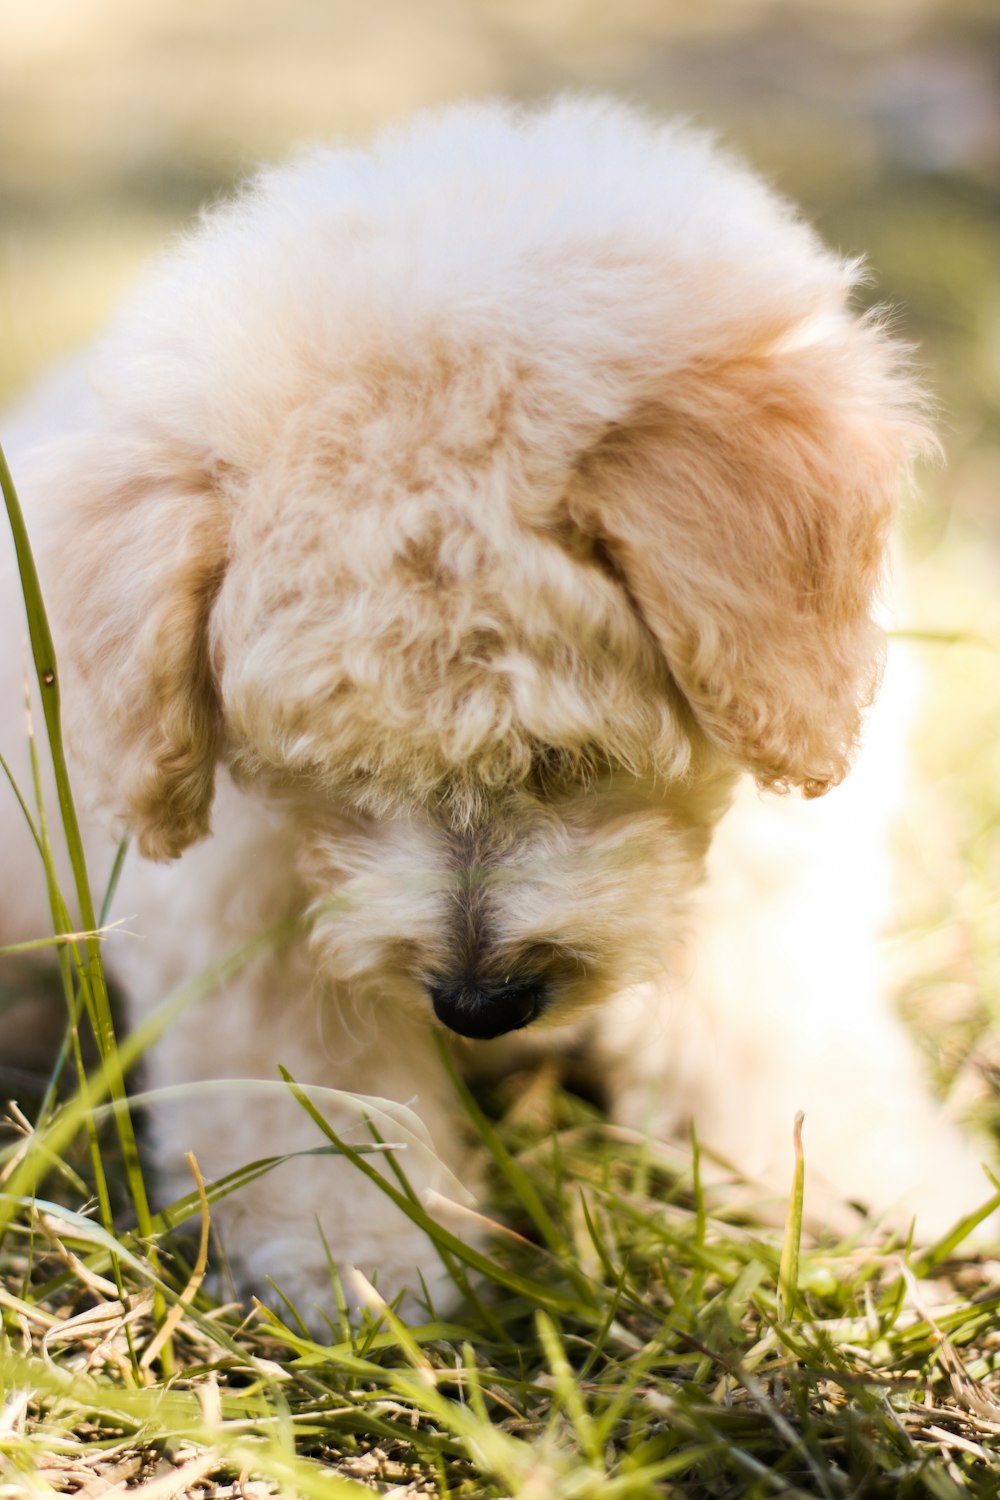 selective focus photography of medium-coated puppy on grass